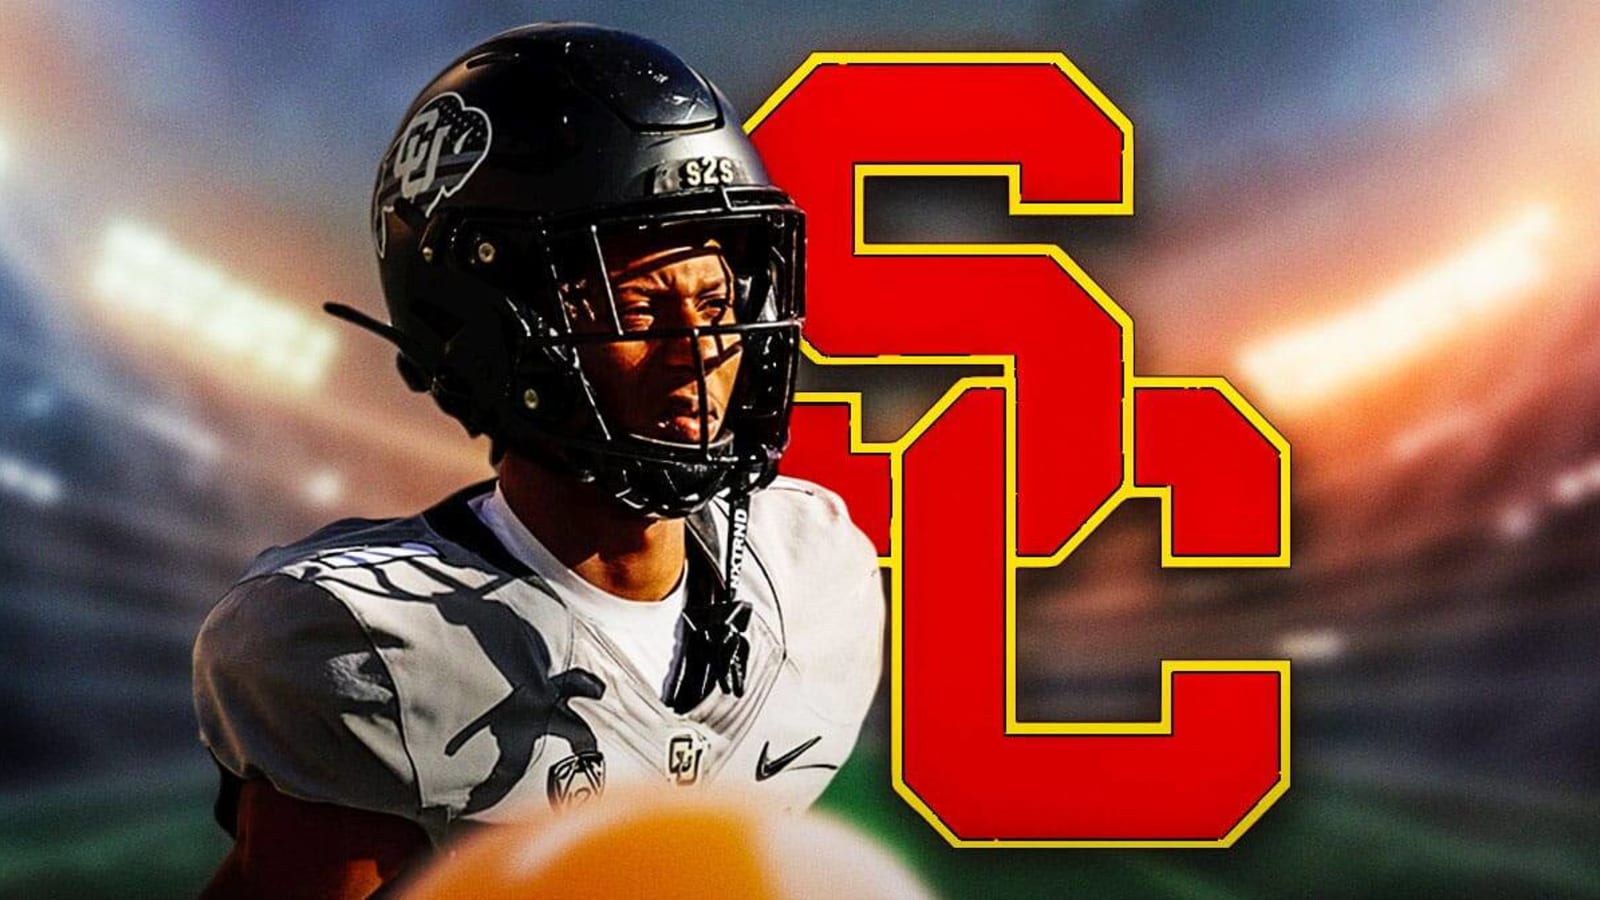 USC football emerges as ‘team to watch’ for Colorado 5-star transfer